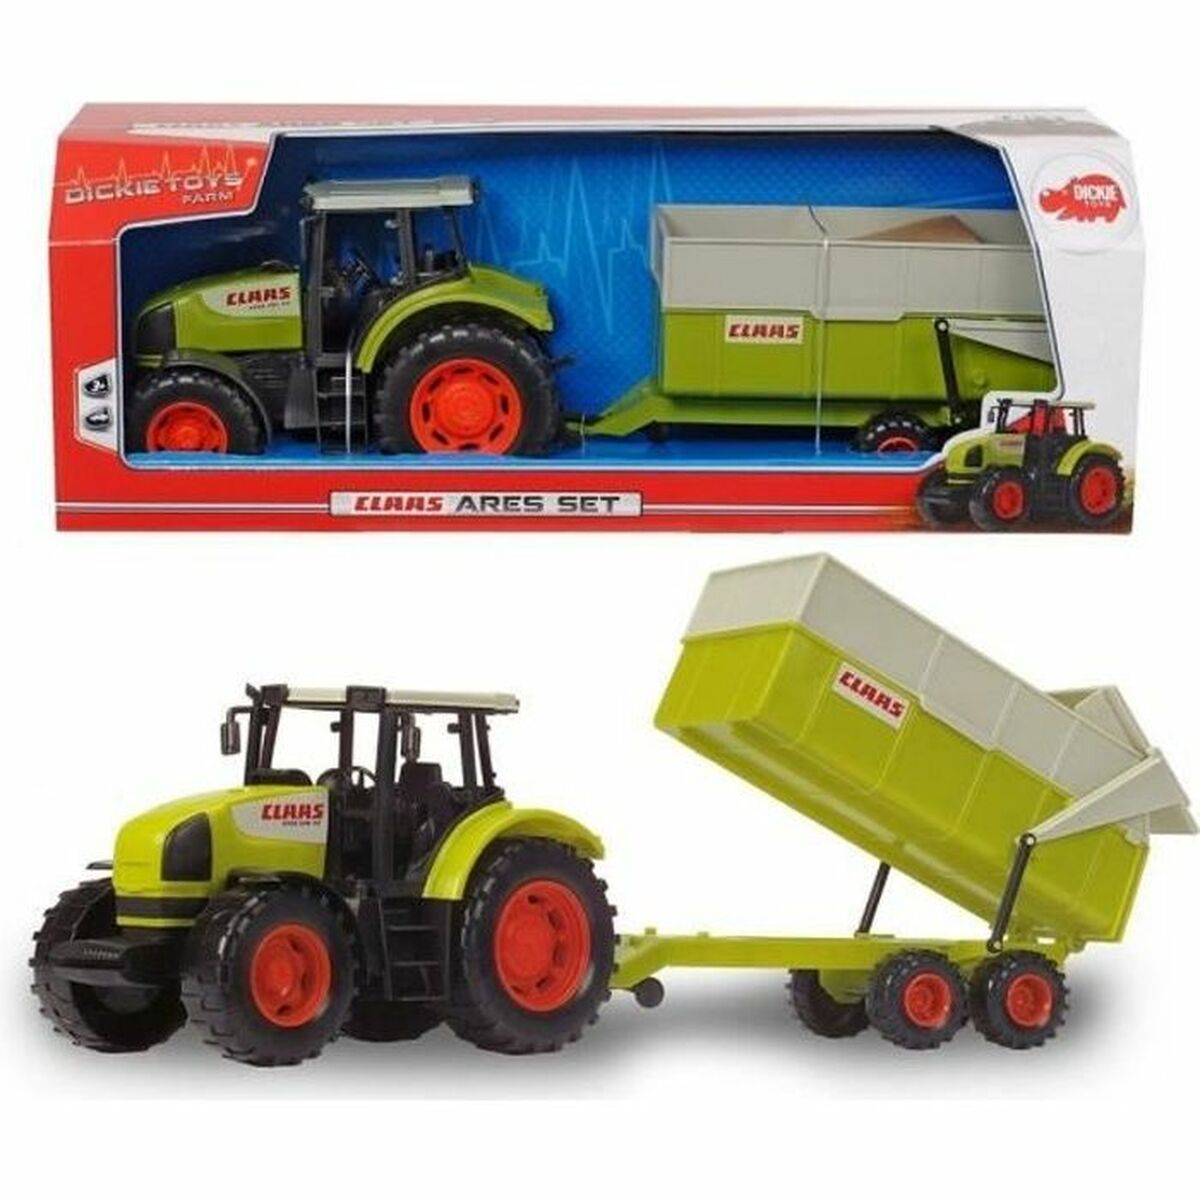 Speelgoedtractor Dickie Toys Cars Ares Set